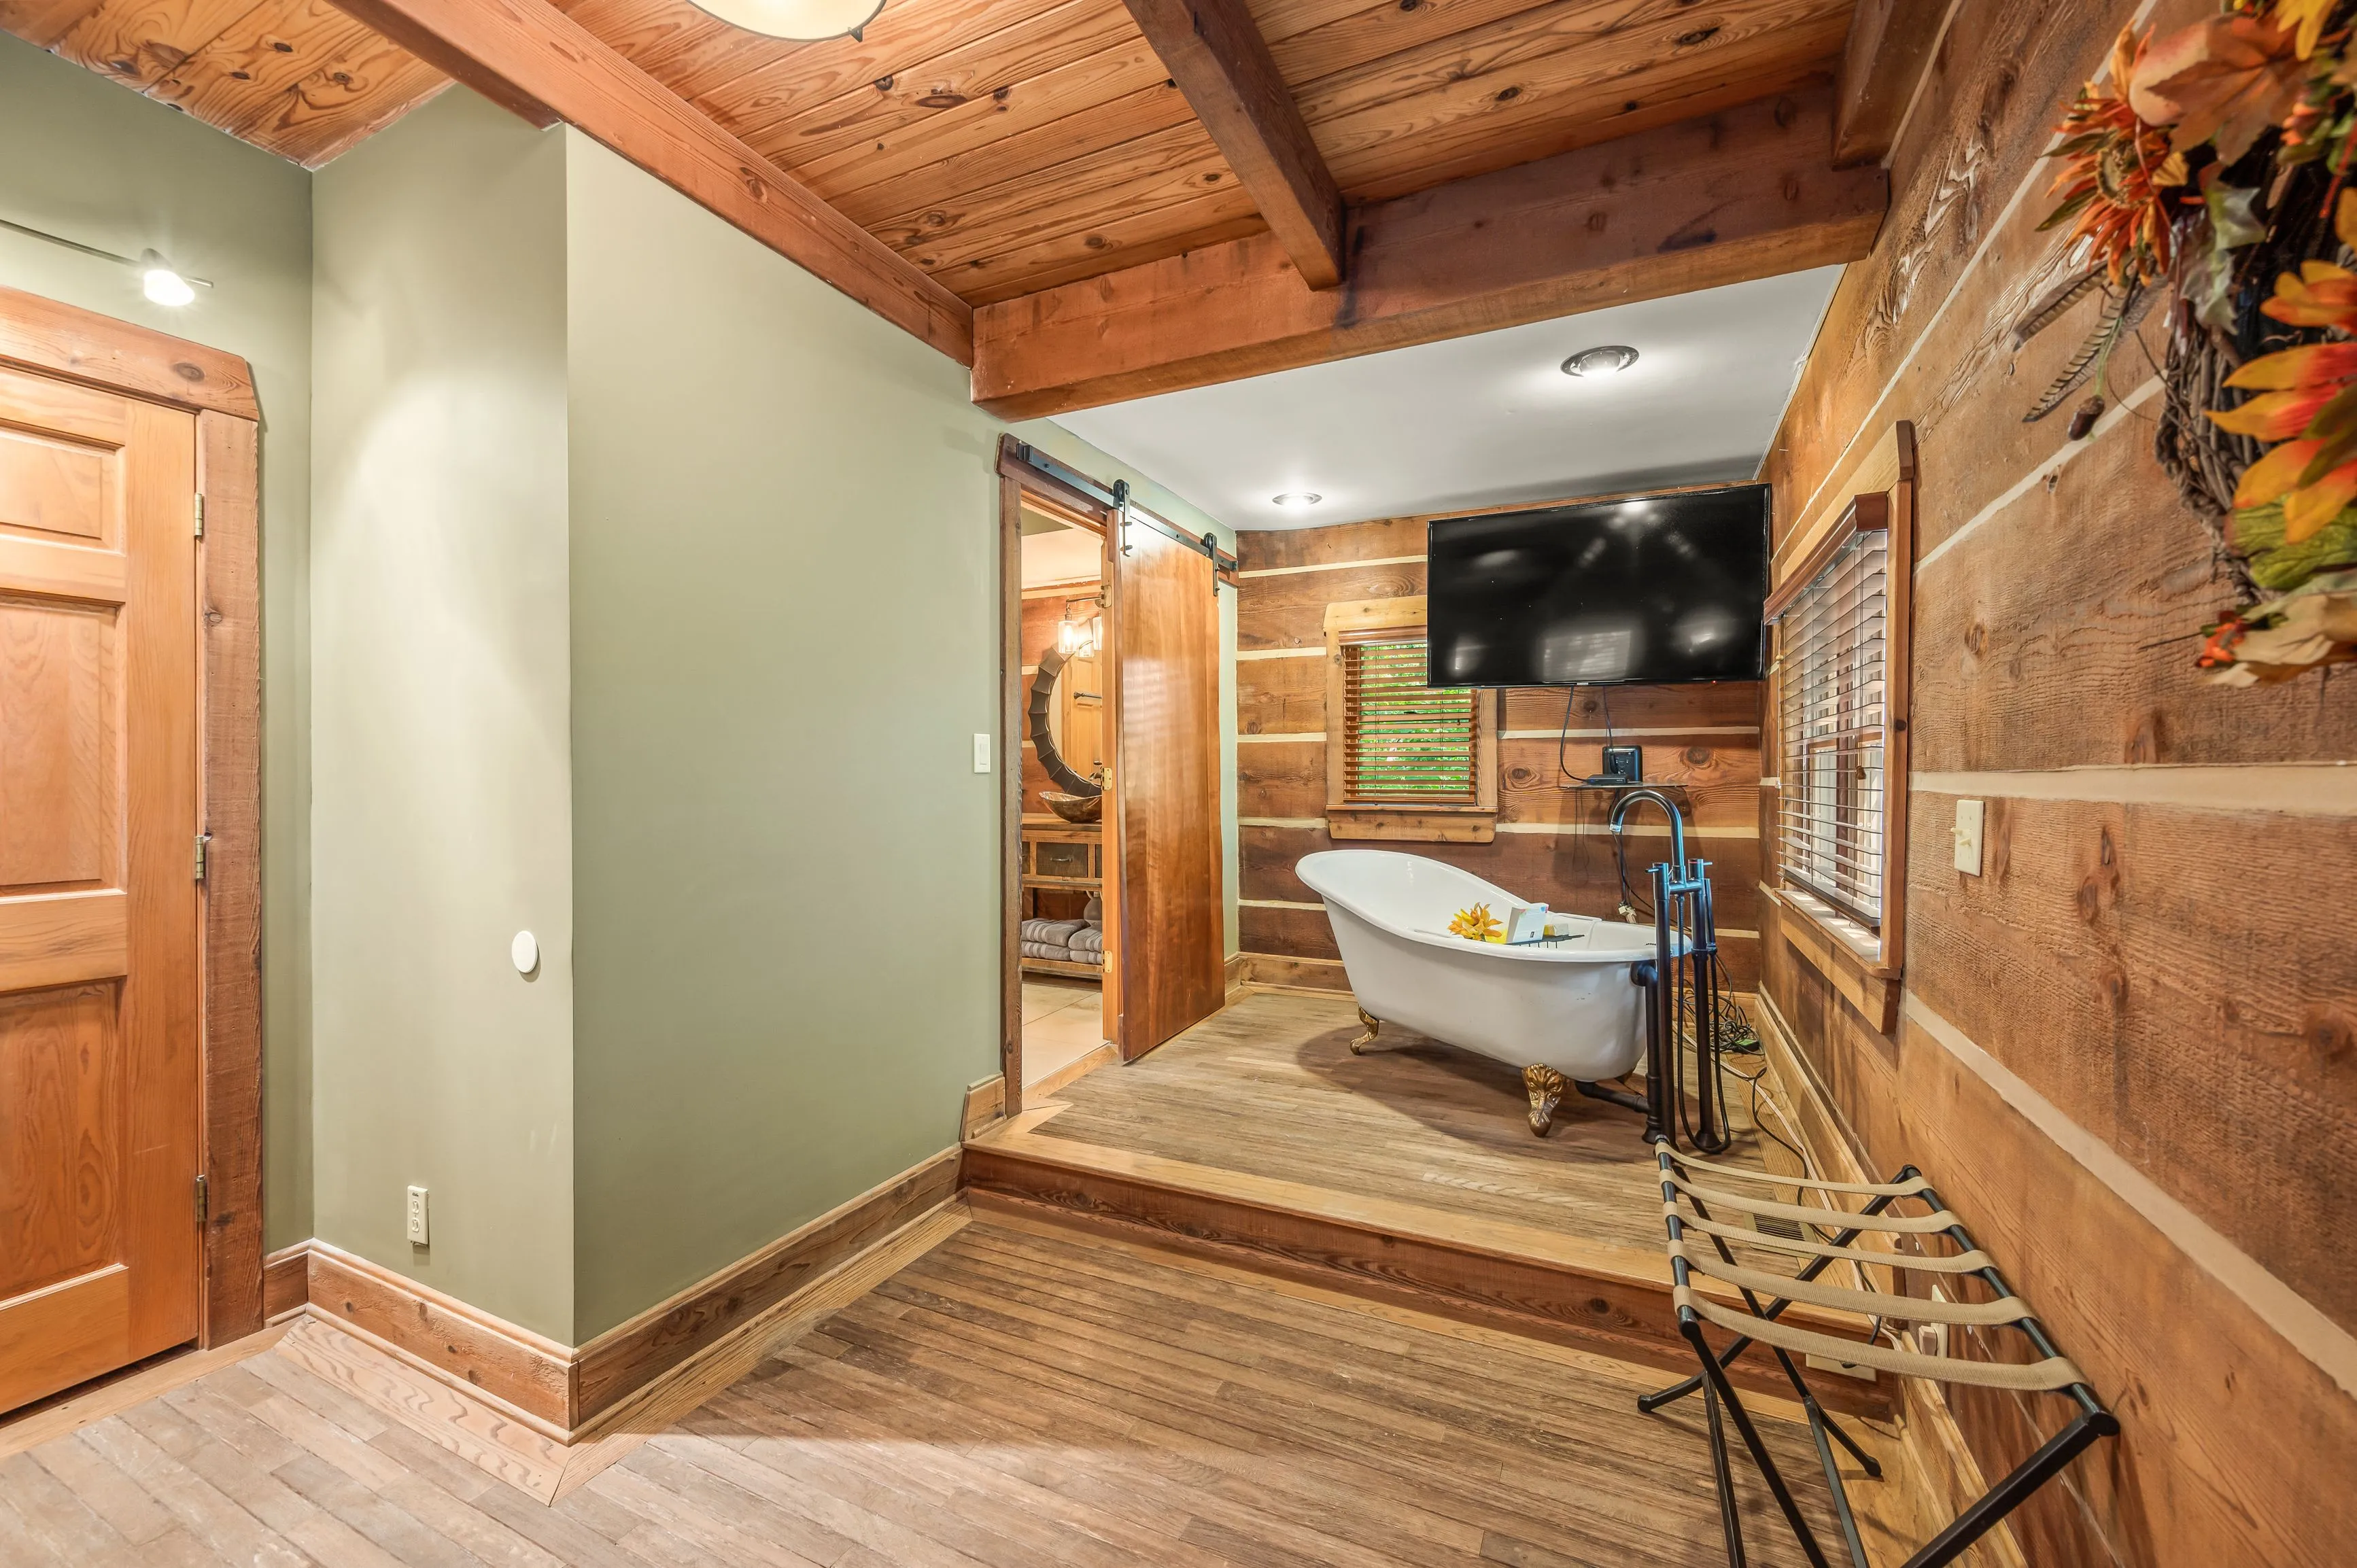 Rustic-style bathroom interior with a freestanding clawfoot bathtub, wooden walls and floors, and sliding barn door leading to a separate room.